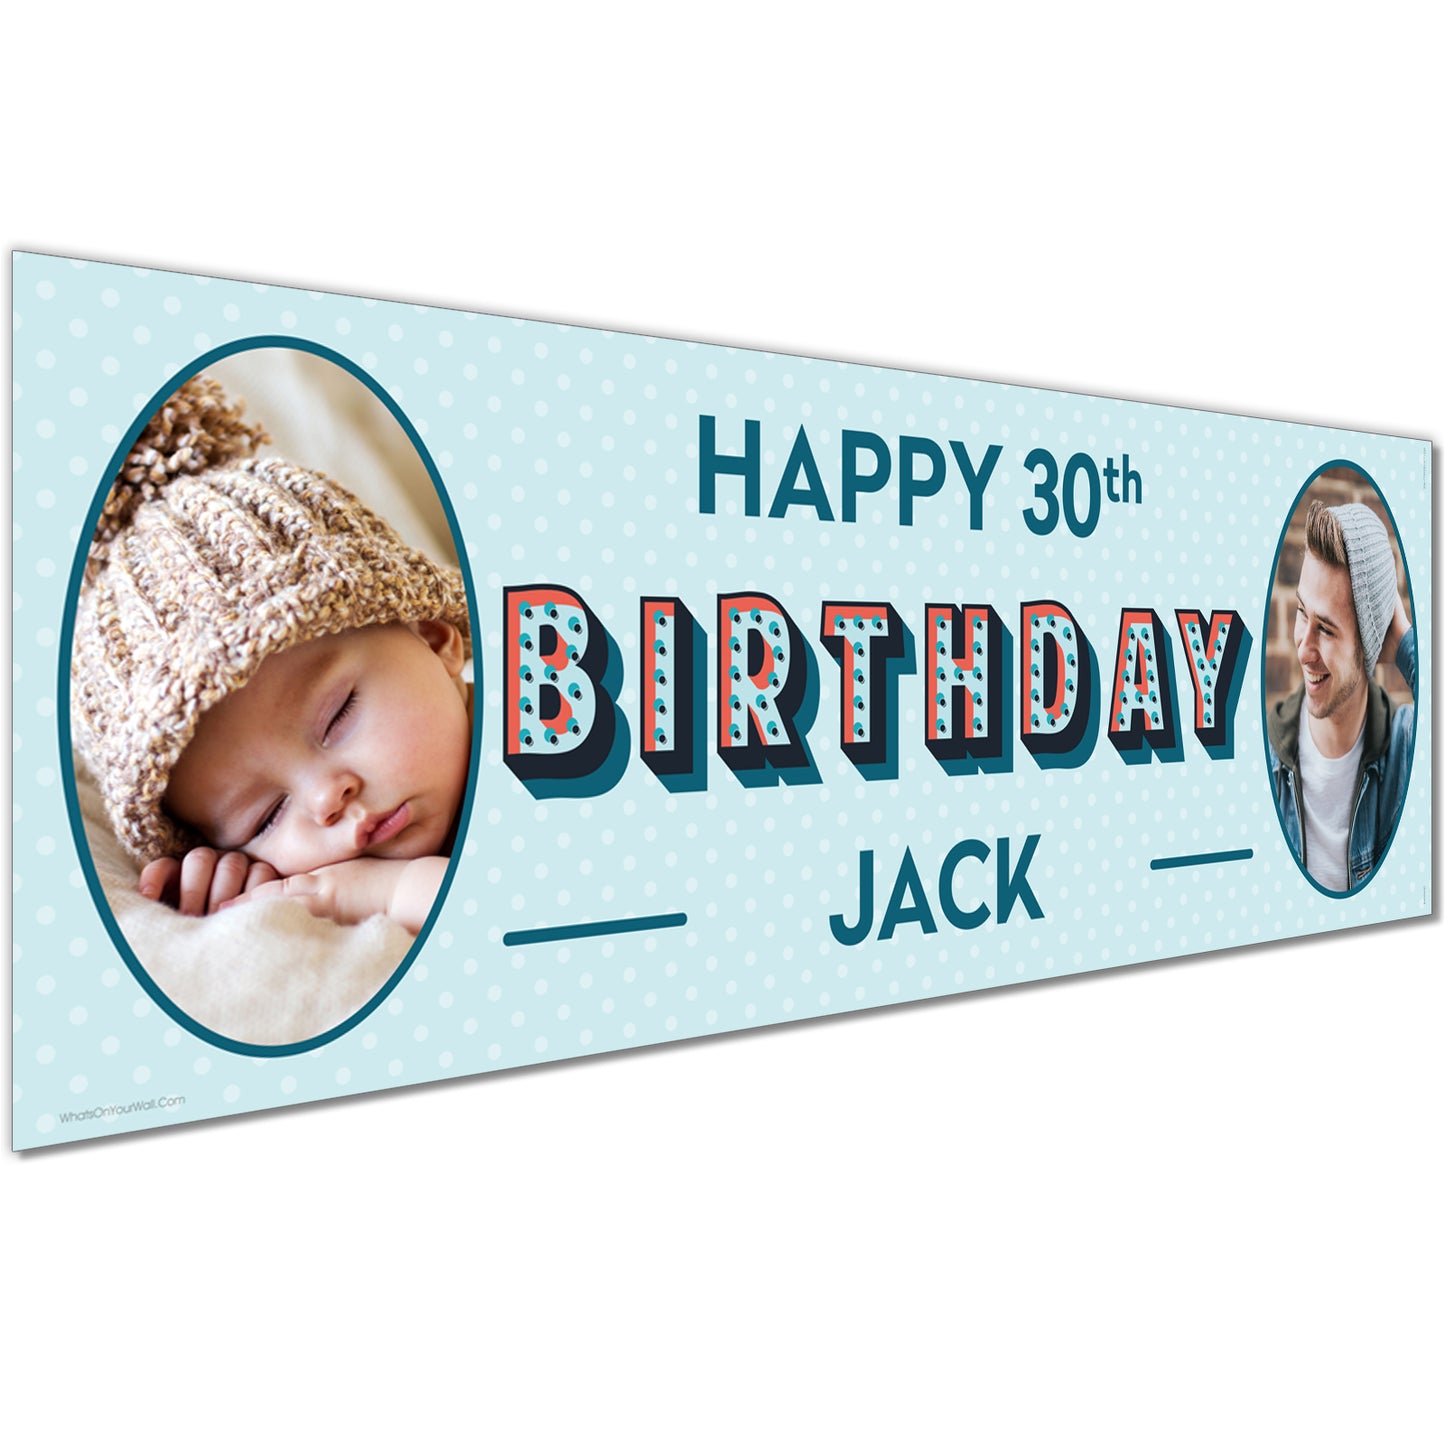 Personalised Birthday Banners in Polka Dots Blue Design